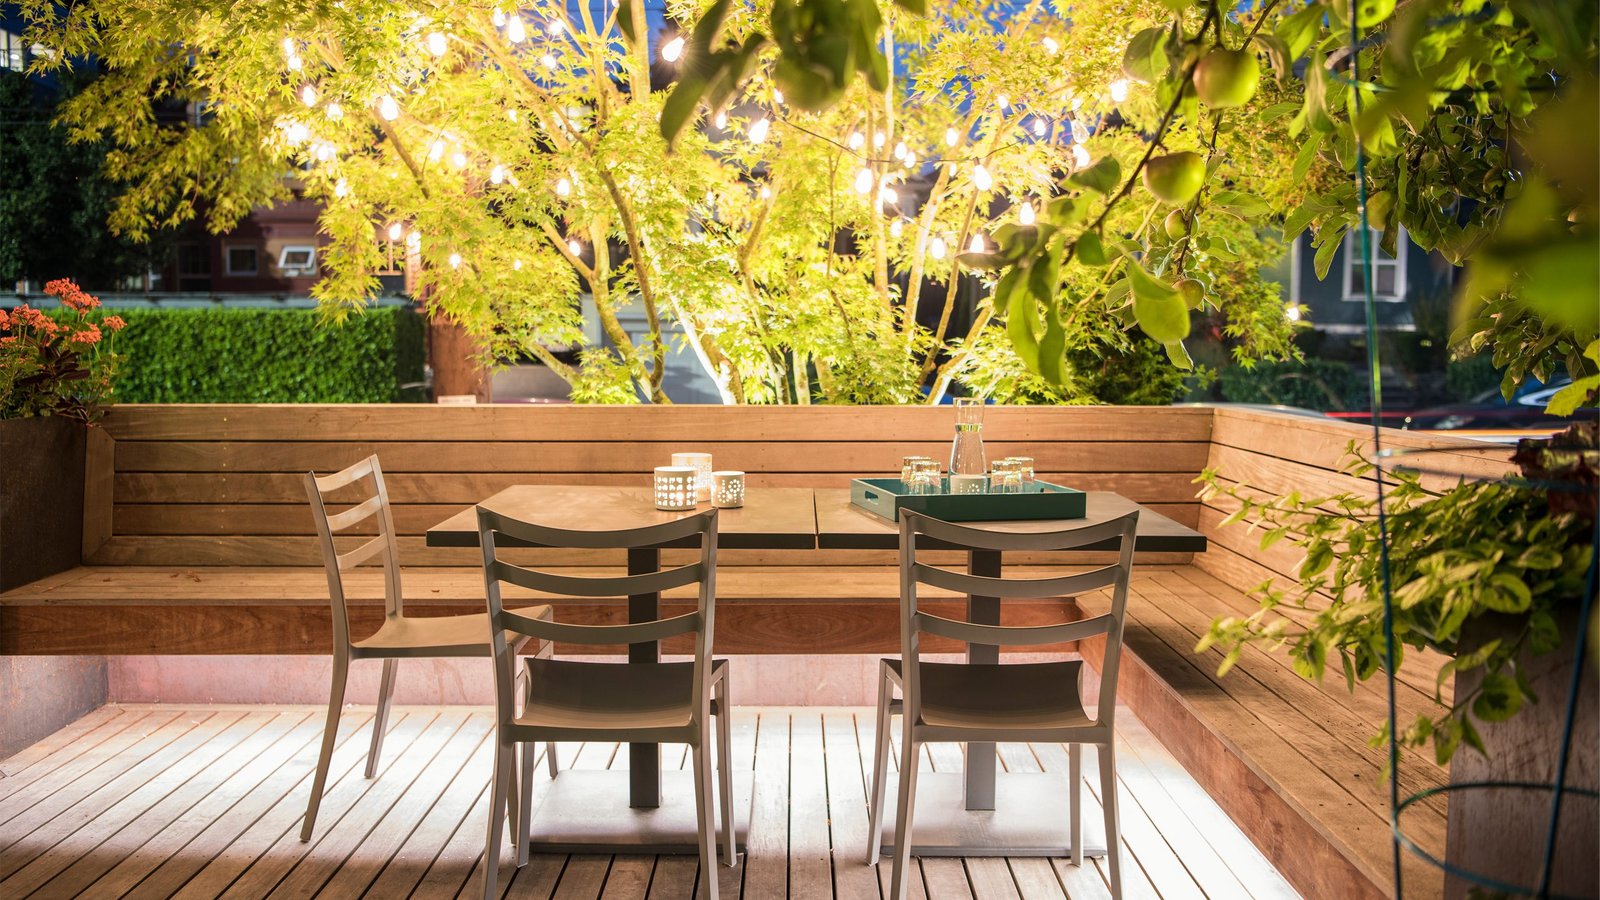 Creating Outdoor Spaces for All-Year Pleasure: Designing Areas to Enjoy in Every Season